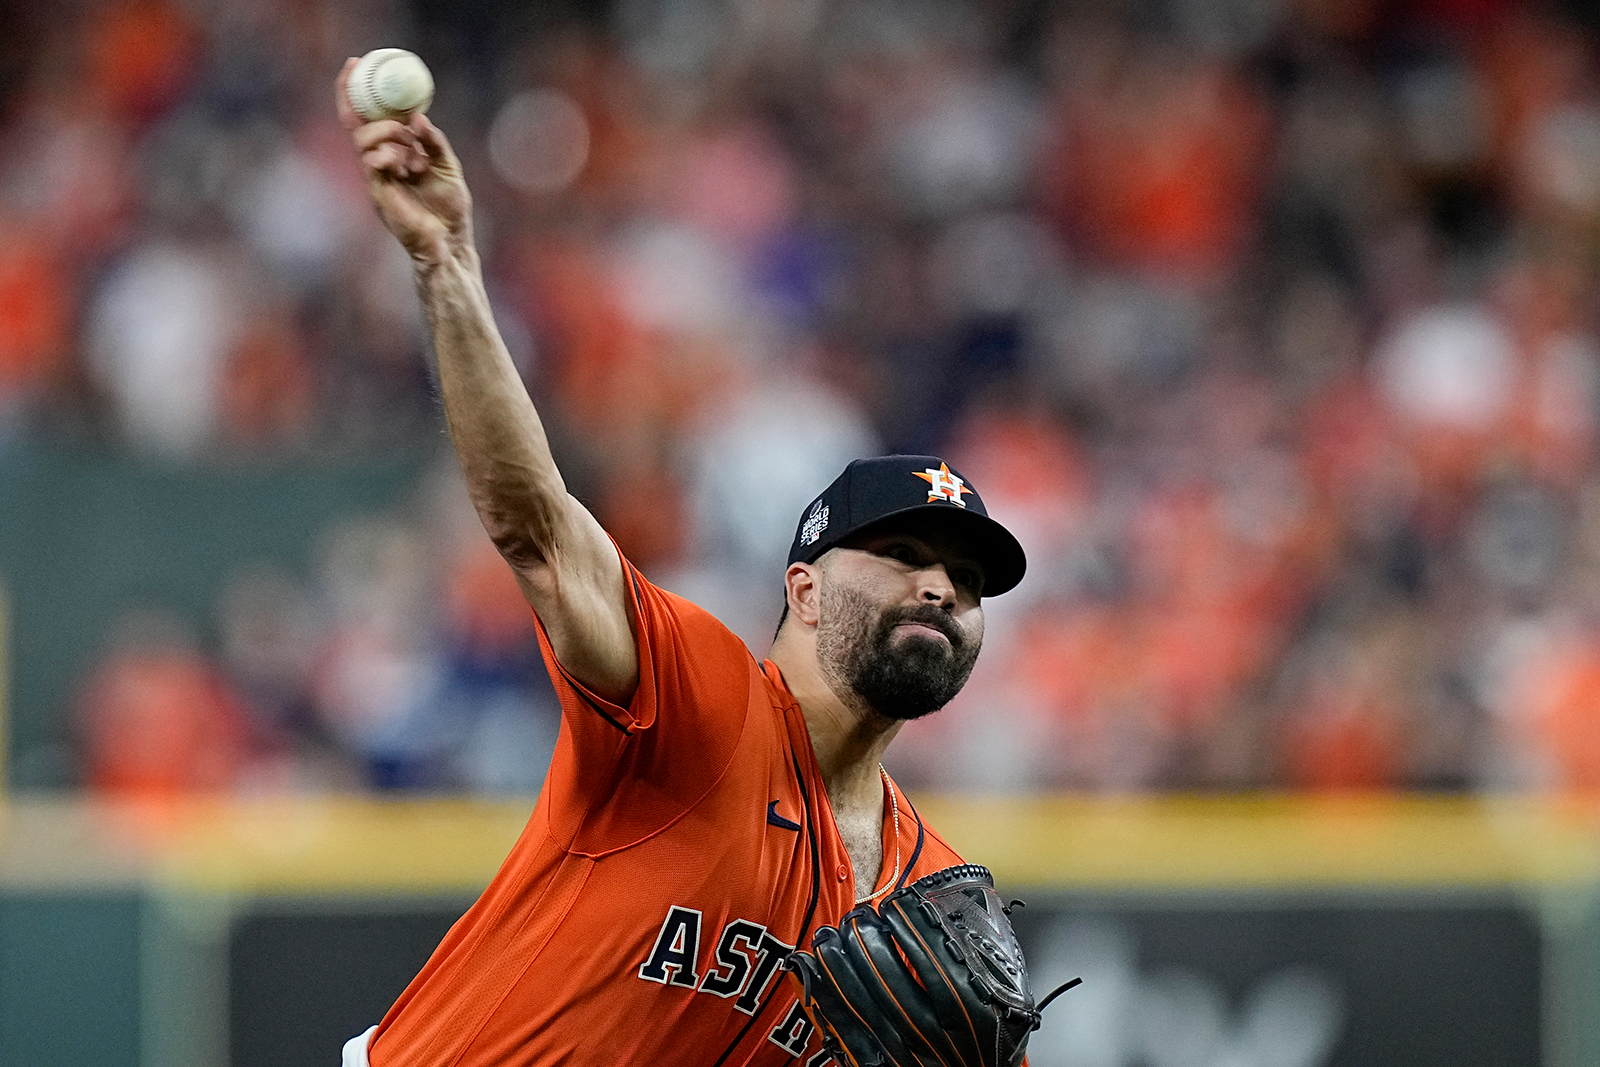 Houston Astros starting pitcher Jose Urquidy throws during the first inning in Game 2.